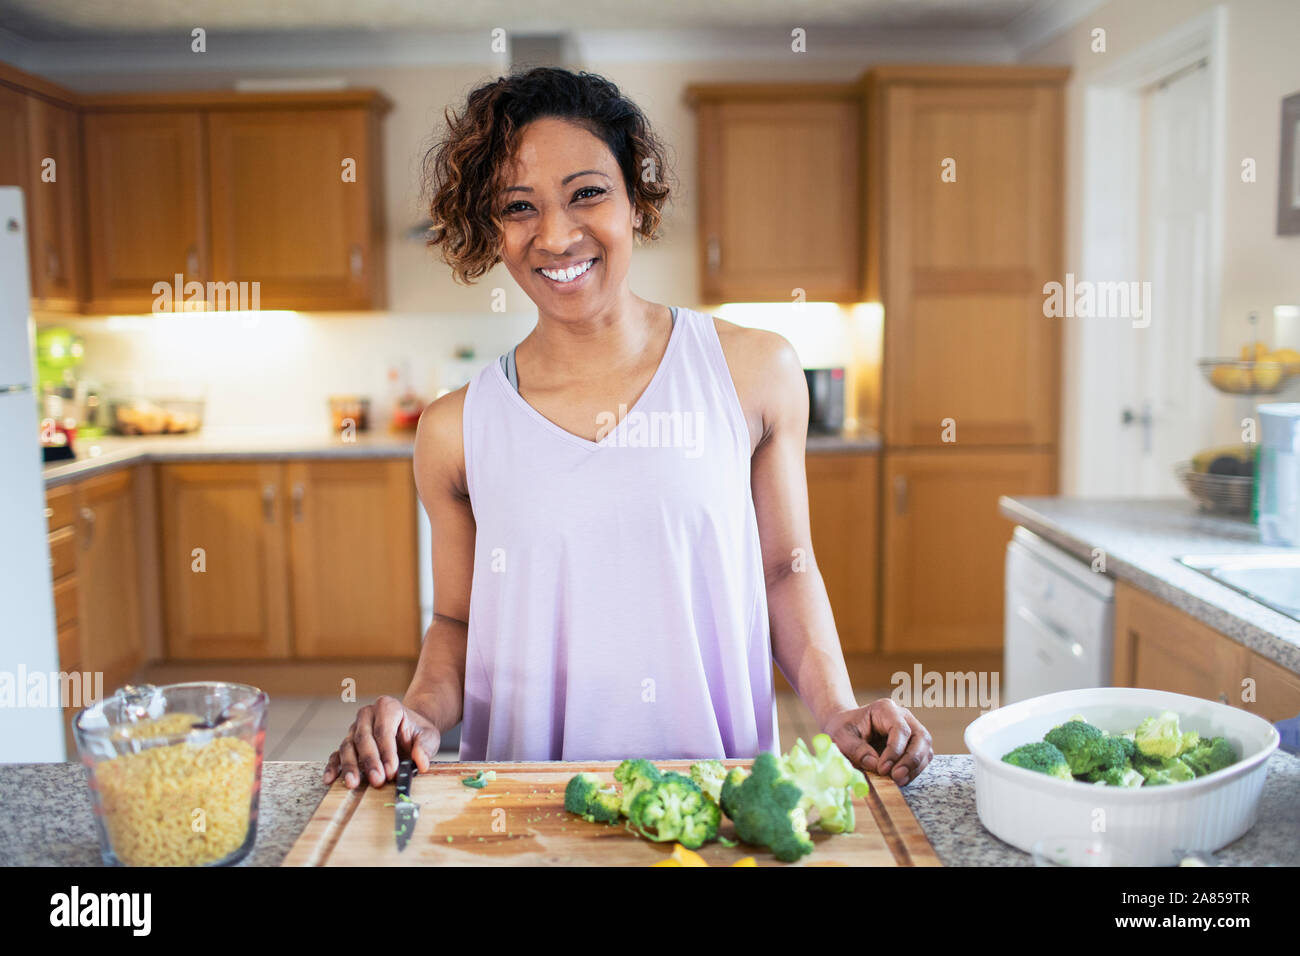 Portrait smiling, confident woman cooking in kitchen Stock Photo